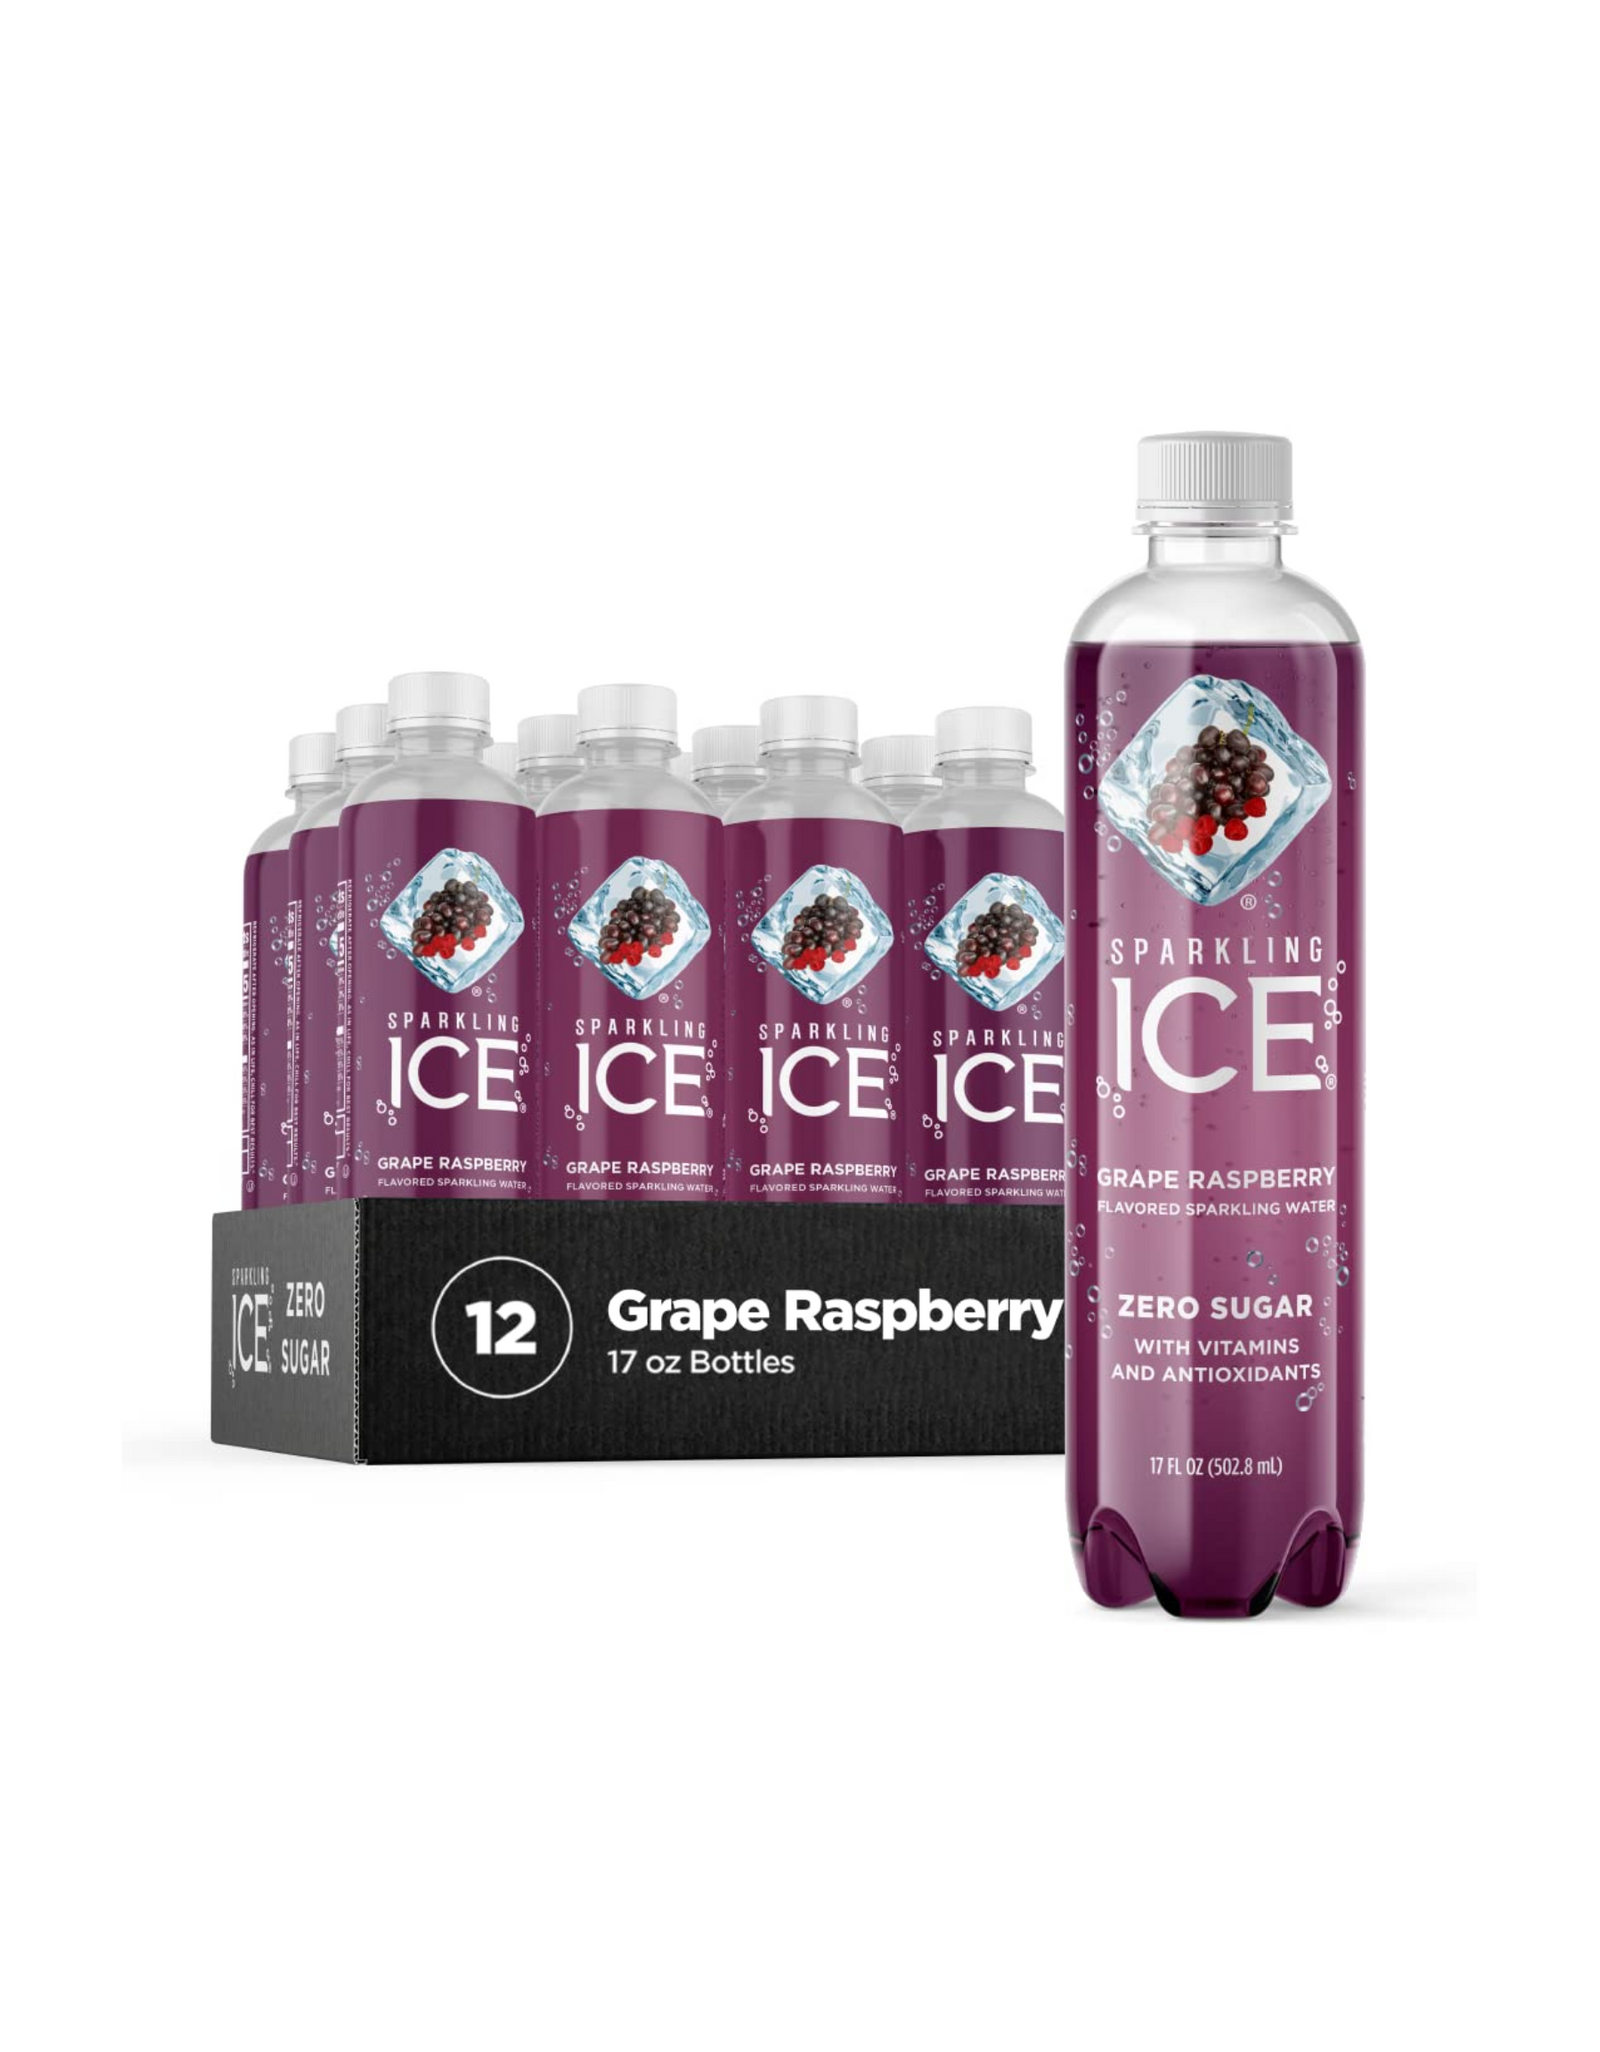 Sparkling Ice, Grape Raspberry Sparkling Water, with Vitamins and Antioxidants, 17 fl oz (Pack of 12)